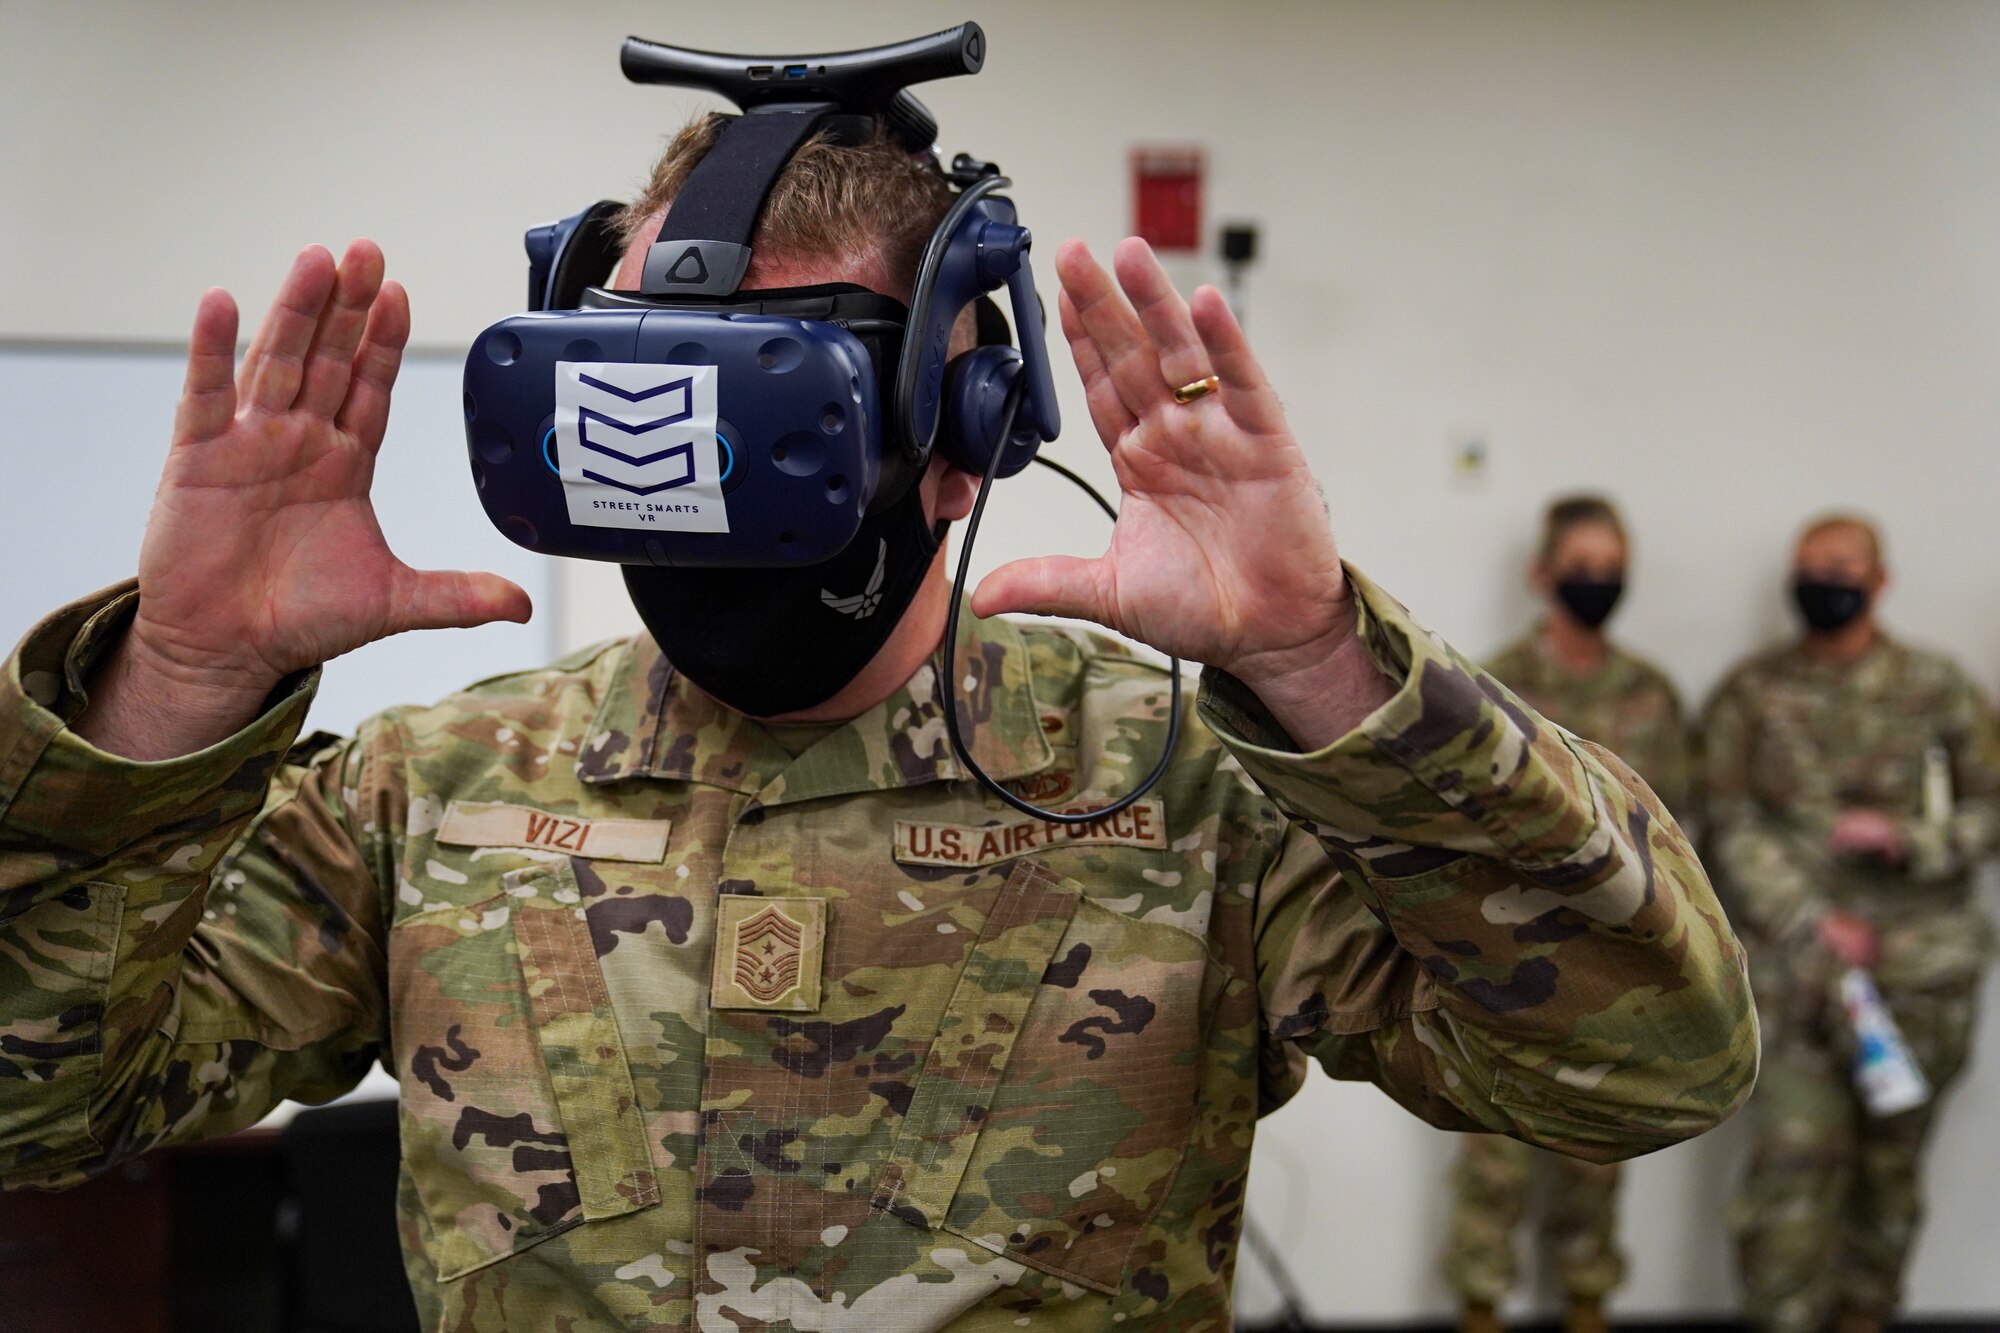 U.S. Air Force Chief Master Sgt. Adam Vizi, 2nd Air Force command chief, uses a virtual-reality system during an immersion tour at Keesler Air Force Base, Missisippi, September 13, 2021. The 2nd Air Force command team toured the 81st Training Wing as part of Maj. Gen. Michele C. Edmondson, 2nd Air Force commander, initial immersion visit to the installation since taking command of 2nd Air Force in July. (U.S. Air Force photo by Senior Airman Spencer Tobler)